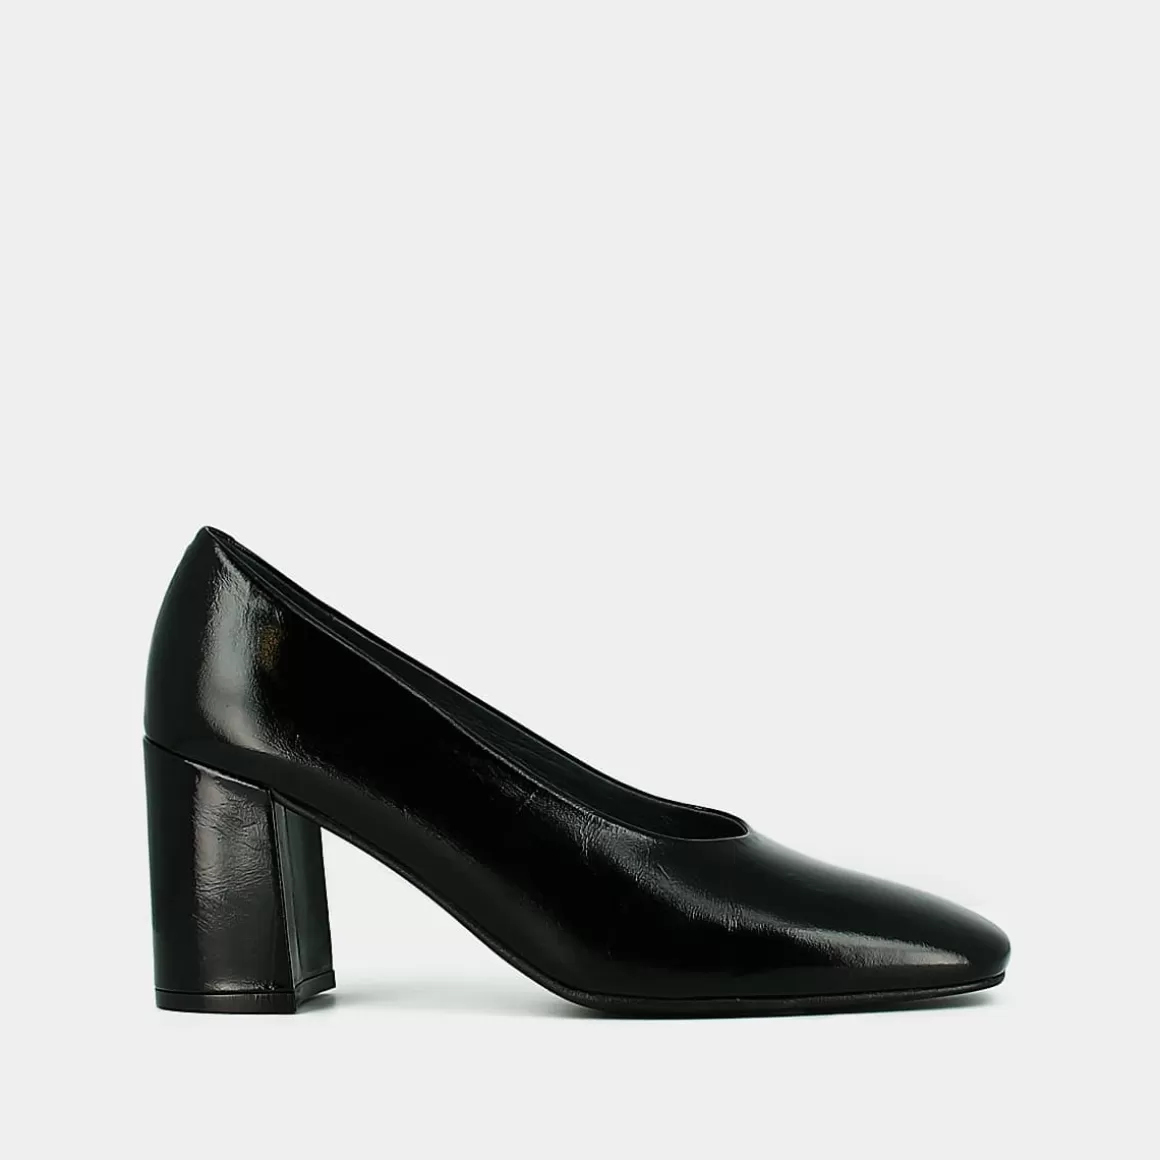 Pointed-toe pumps<Jonak New